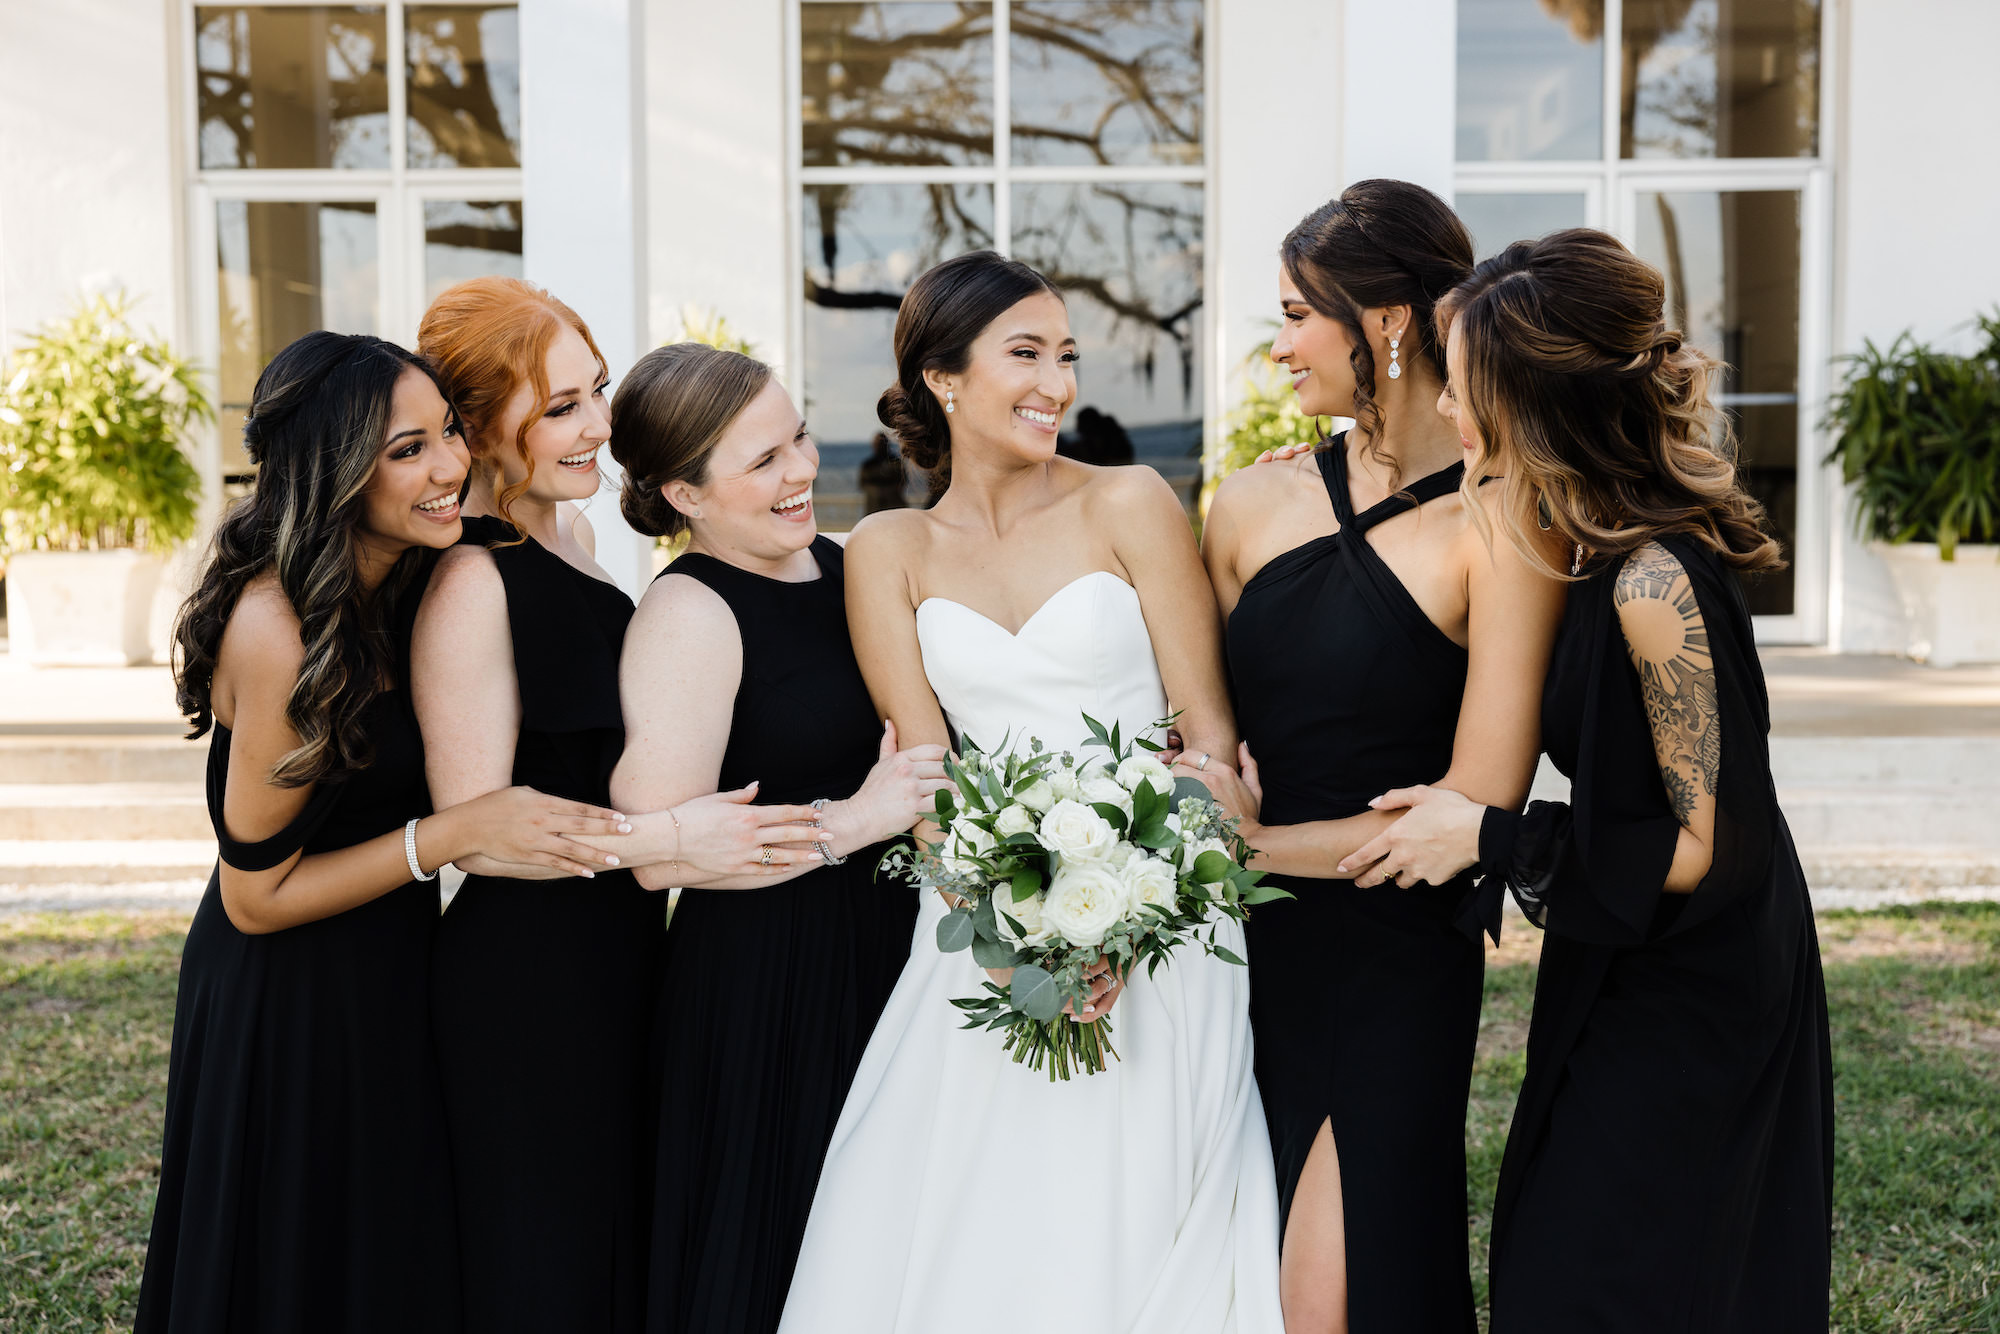 Classic Bride with Bridesmaids Wearing Mix and Match Black Dresses | Tampa Bay Wedding Hair and Makeup Femme Akoi Beauty Studio | Wedding Florist Monarch Events and Design